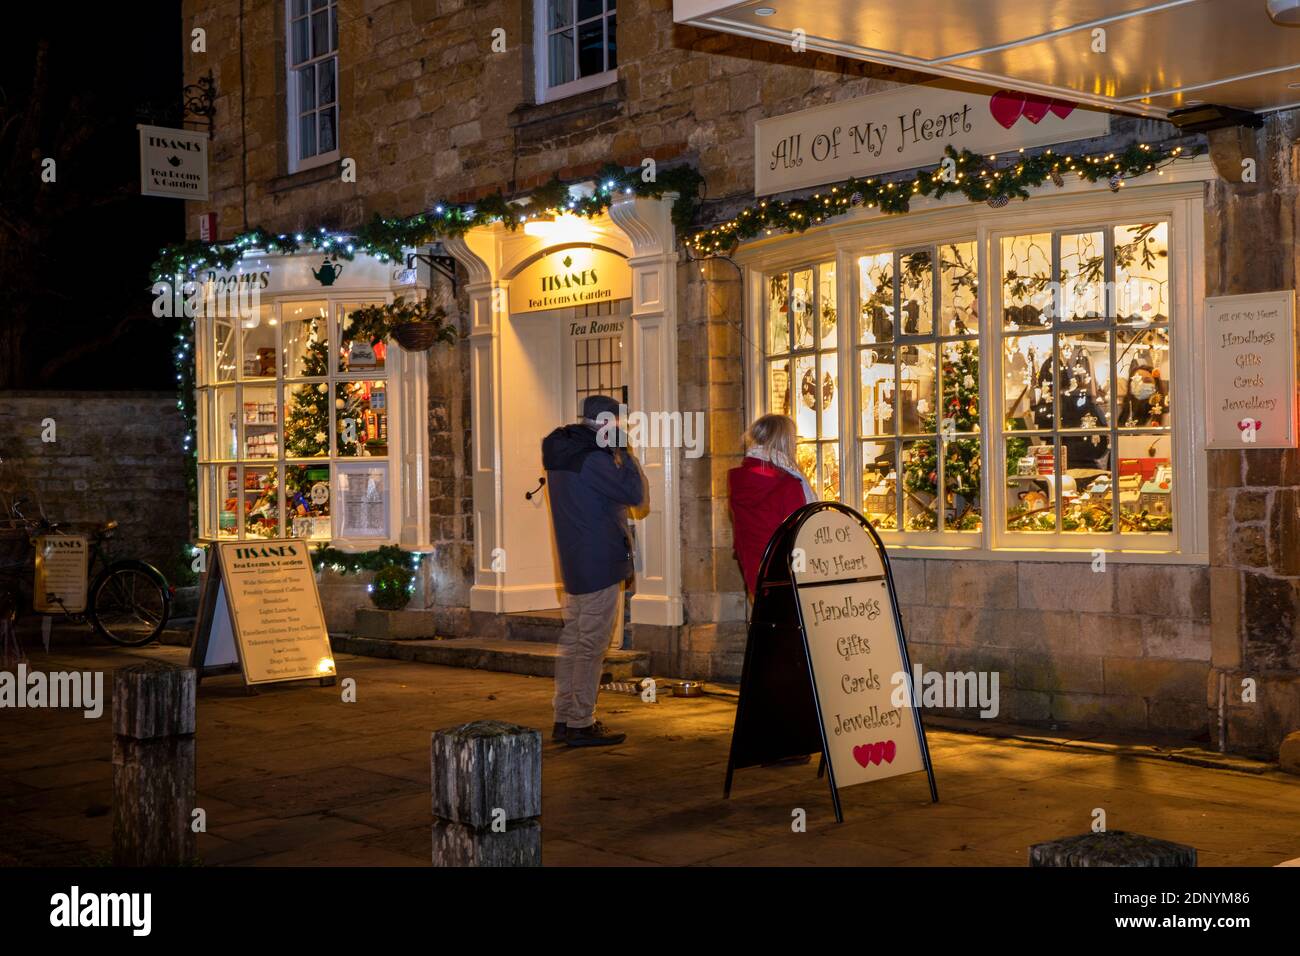 UK, Gloucestershire, Broadway, The Green, Tisanes Tea Room and All Of My Heart gift shop illuminated for village late night Christmas shopping Stock Photo